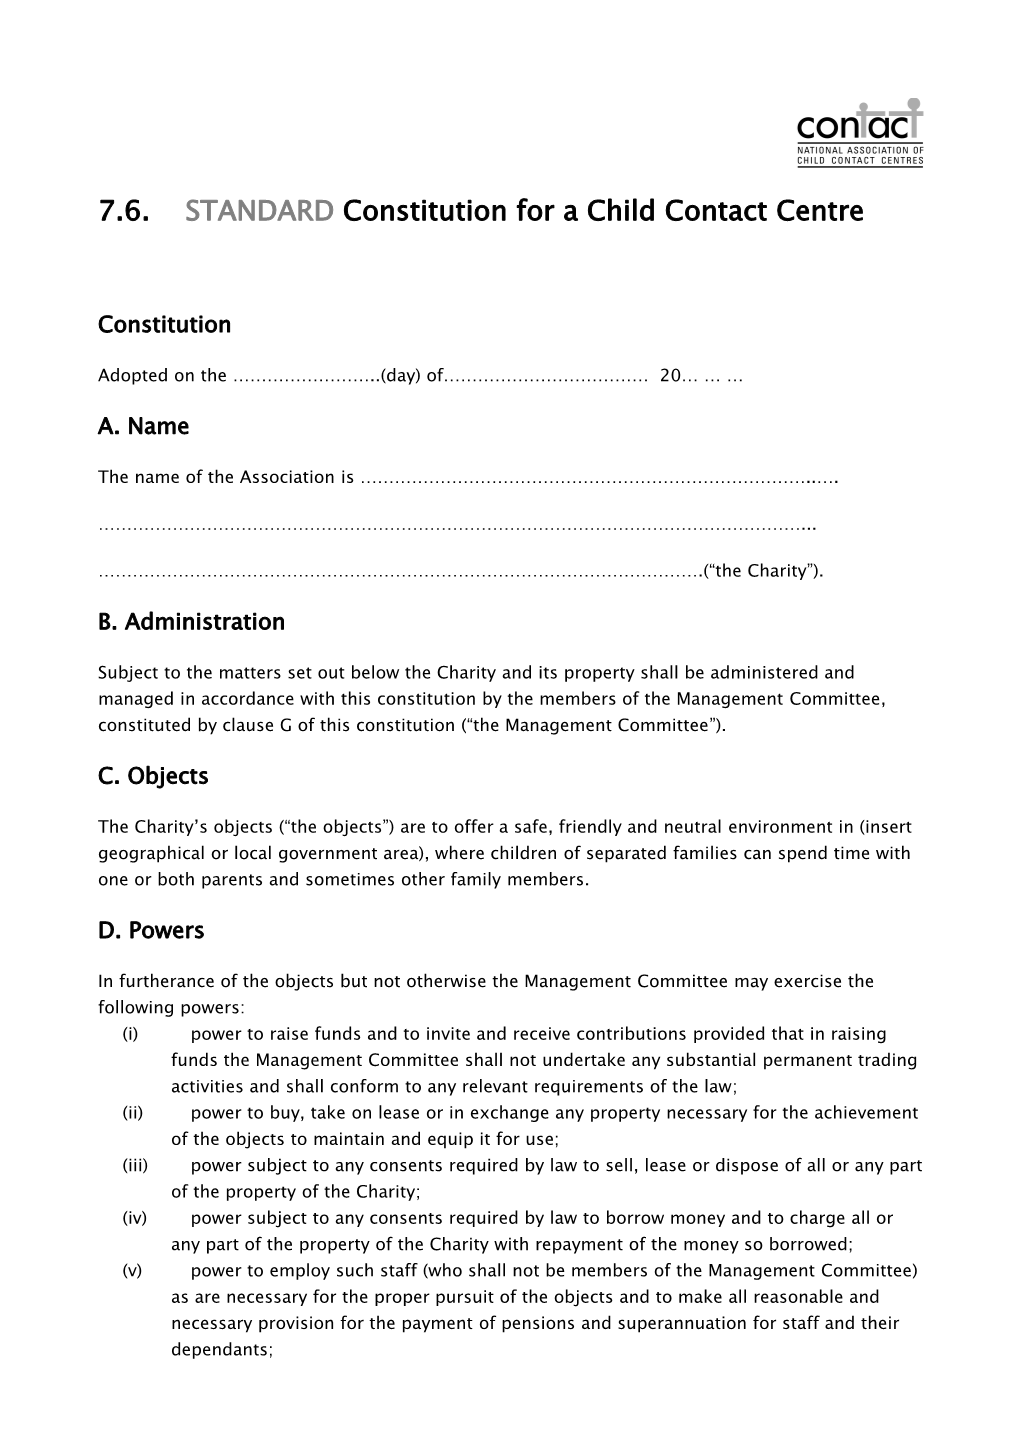 7.6.STANDARD Constitution for a Child Contact Centre